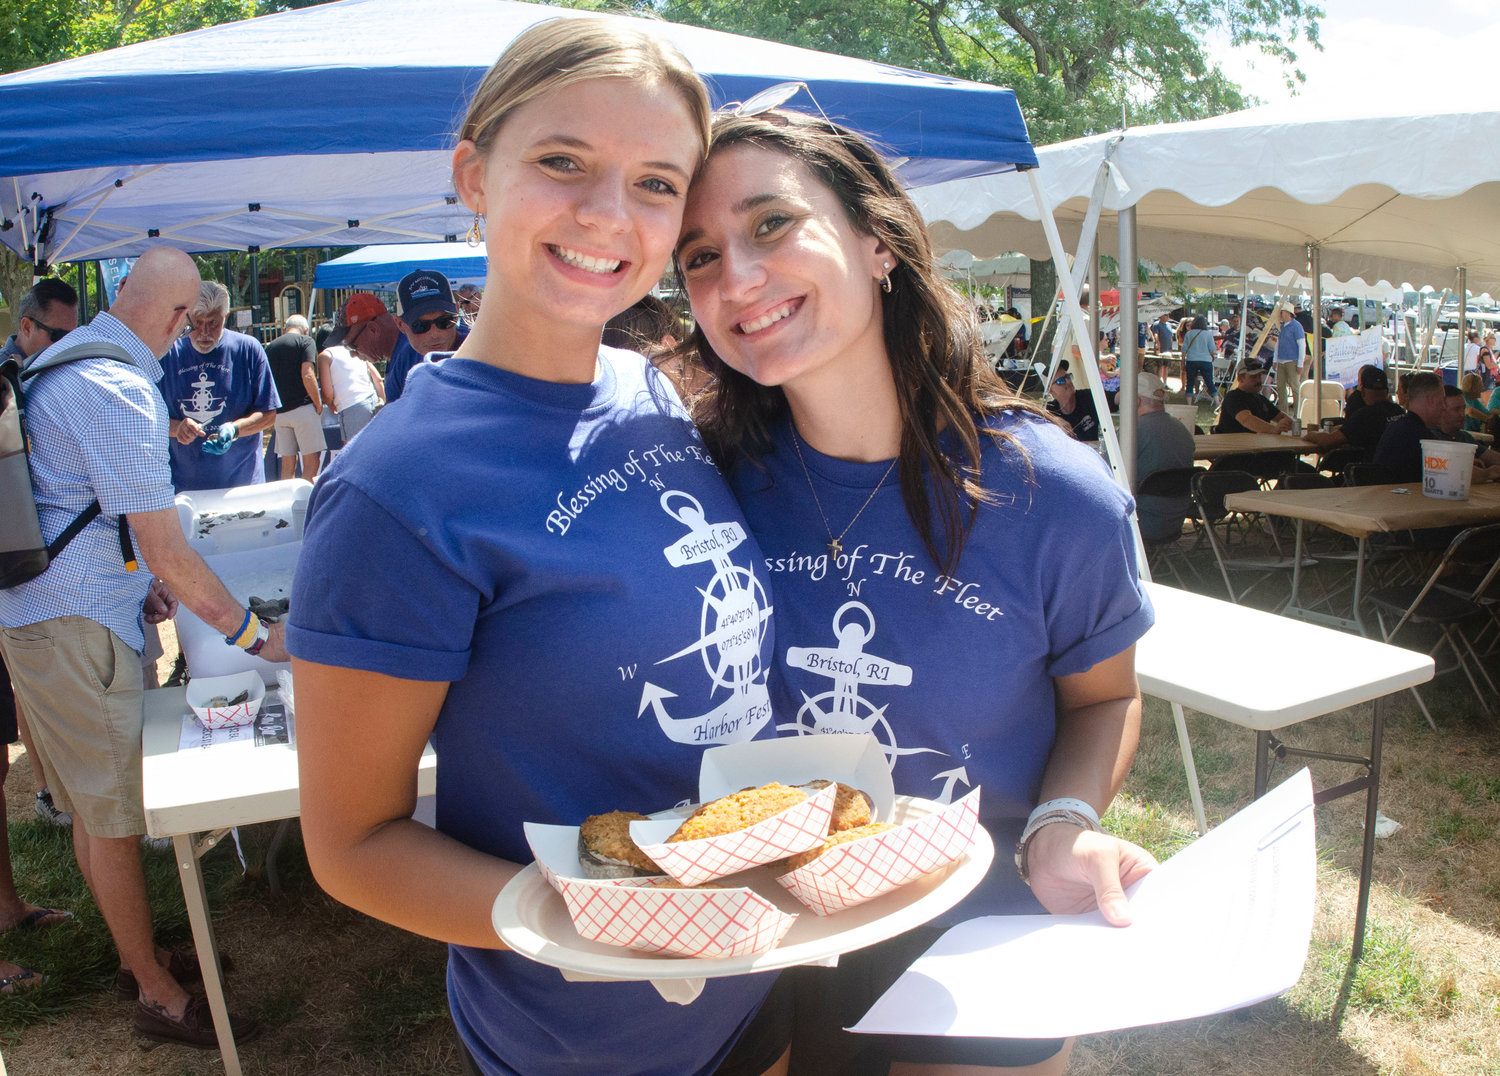 Margaret Williamsand Gabby Marsili help pose while working at the harbor festival on Saturday.